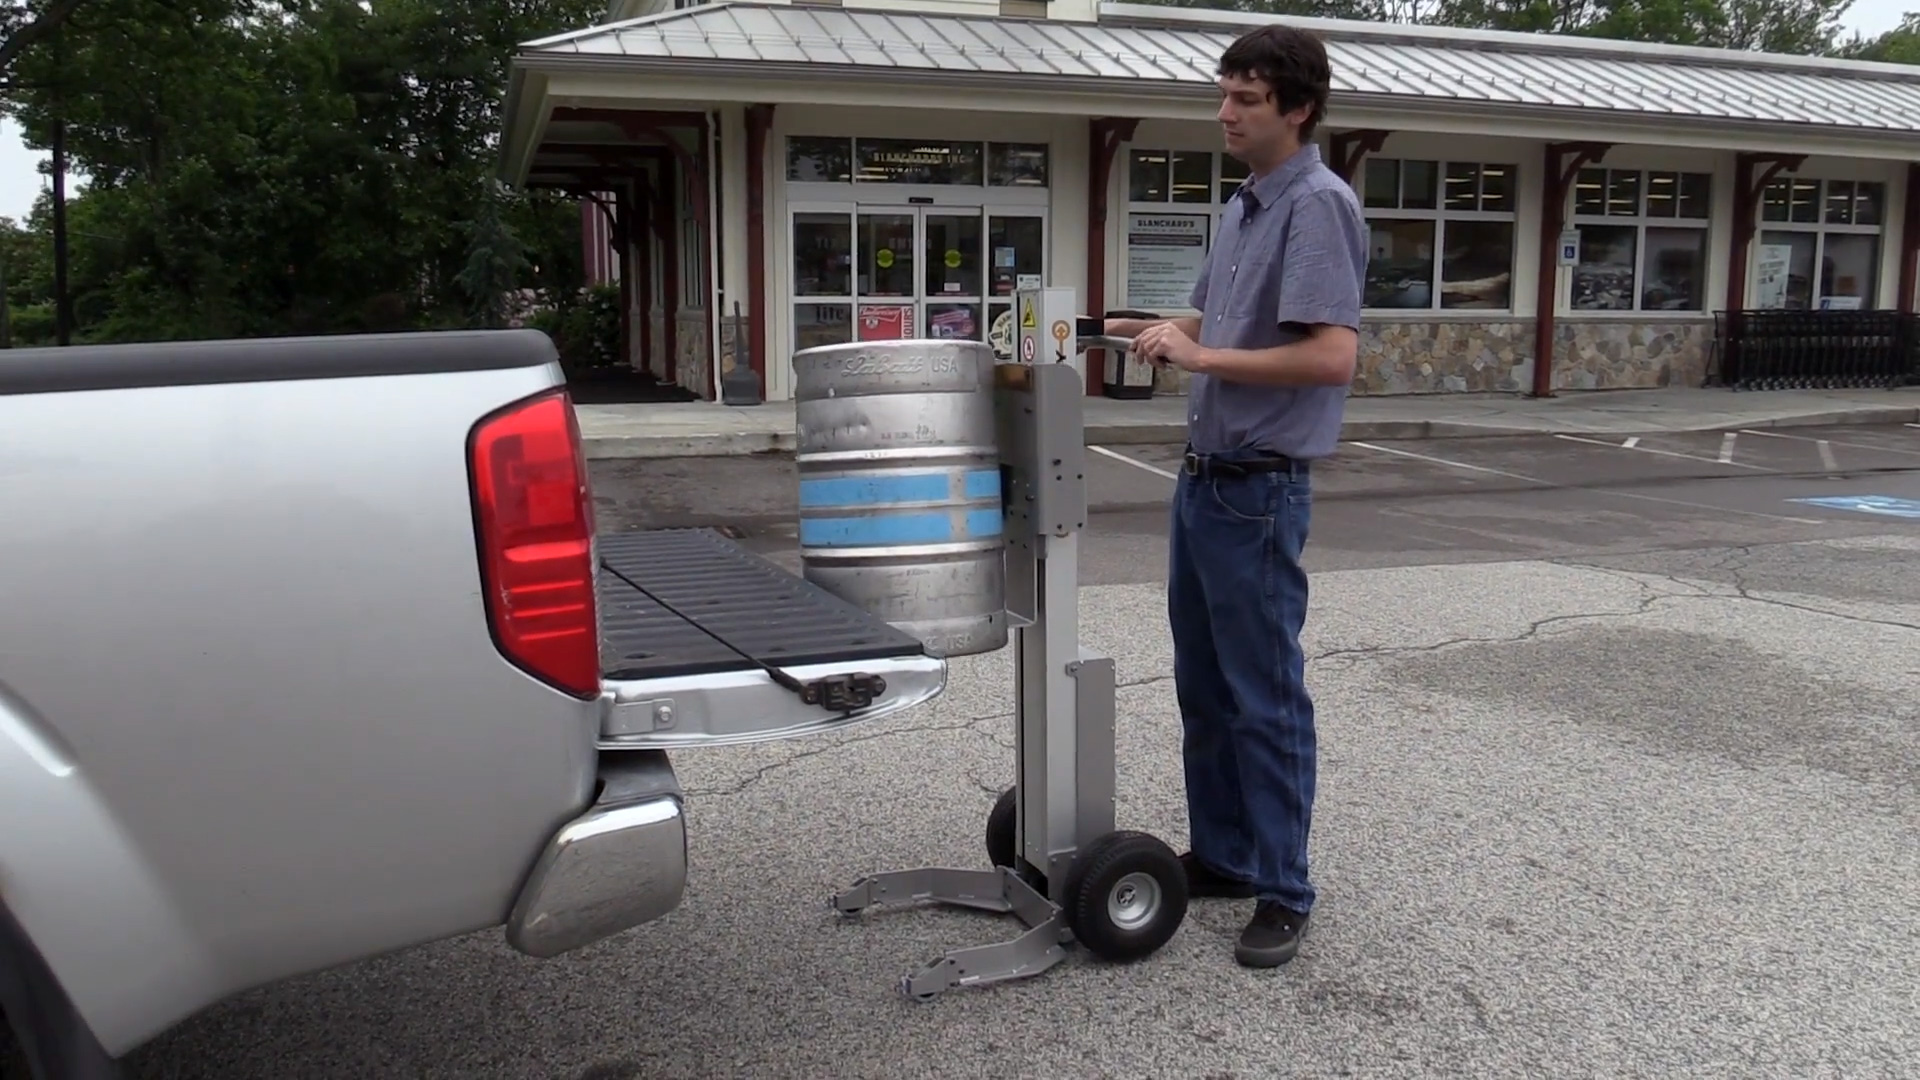 Hand Truck with Lift